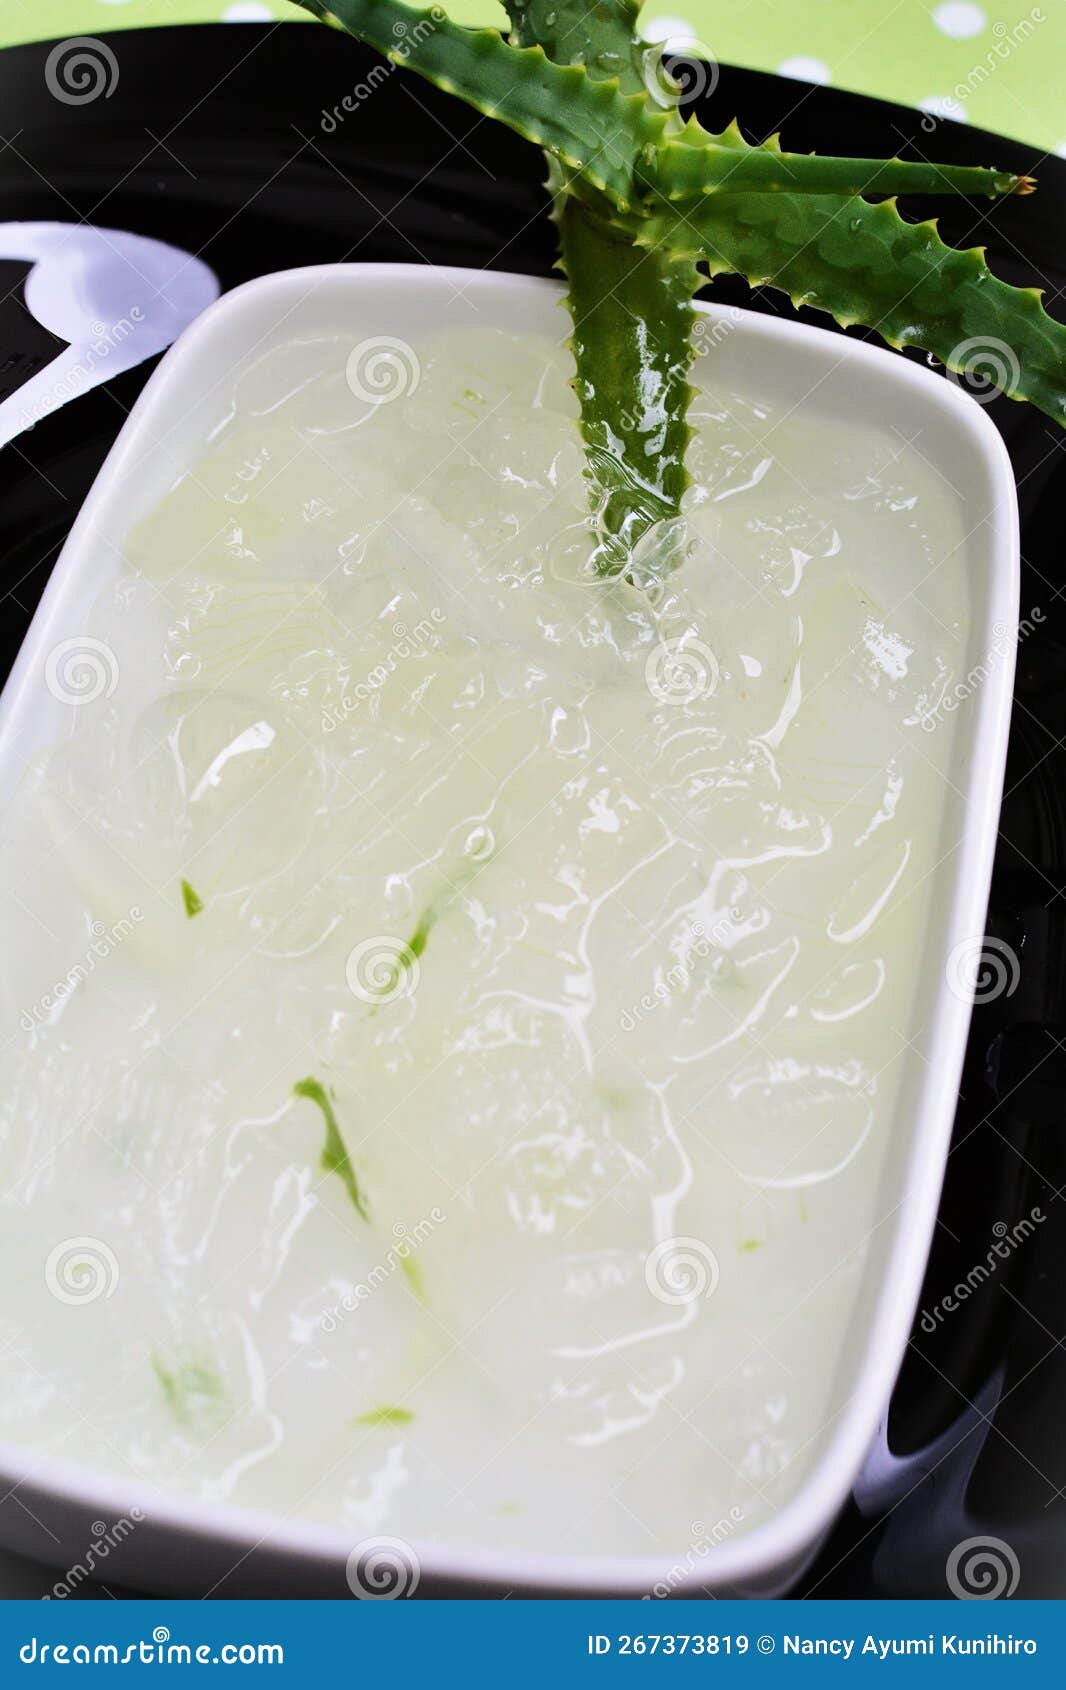 the juice and slime of aloe vera leaves in the bowl